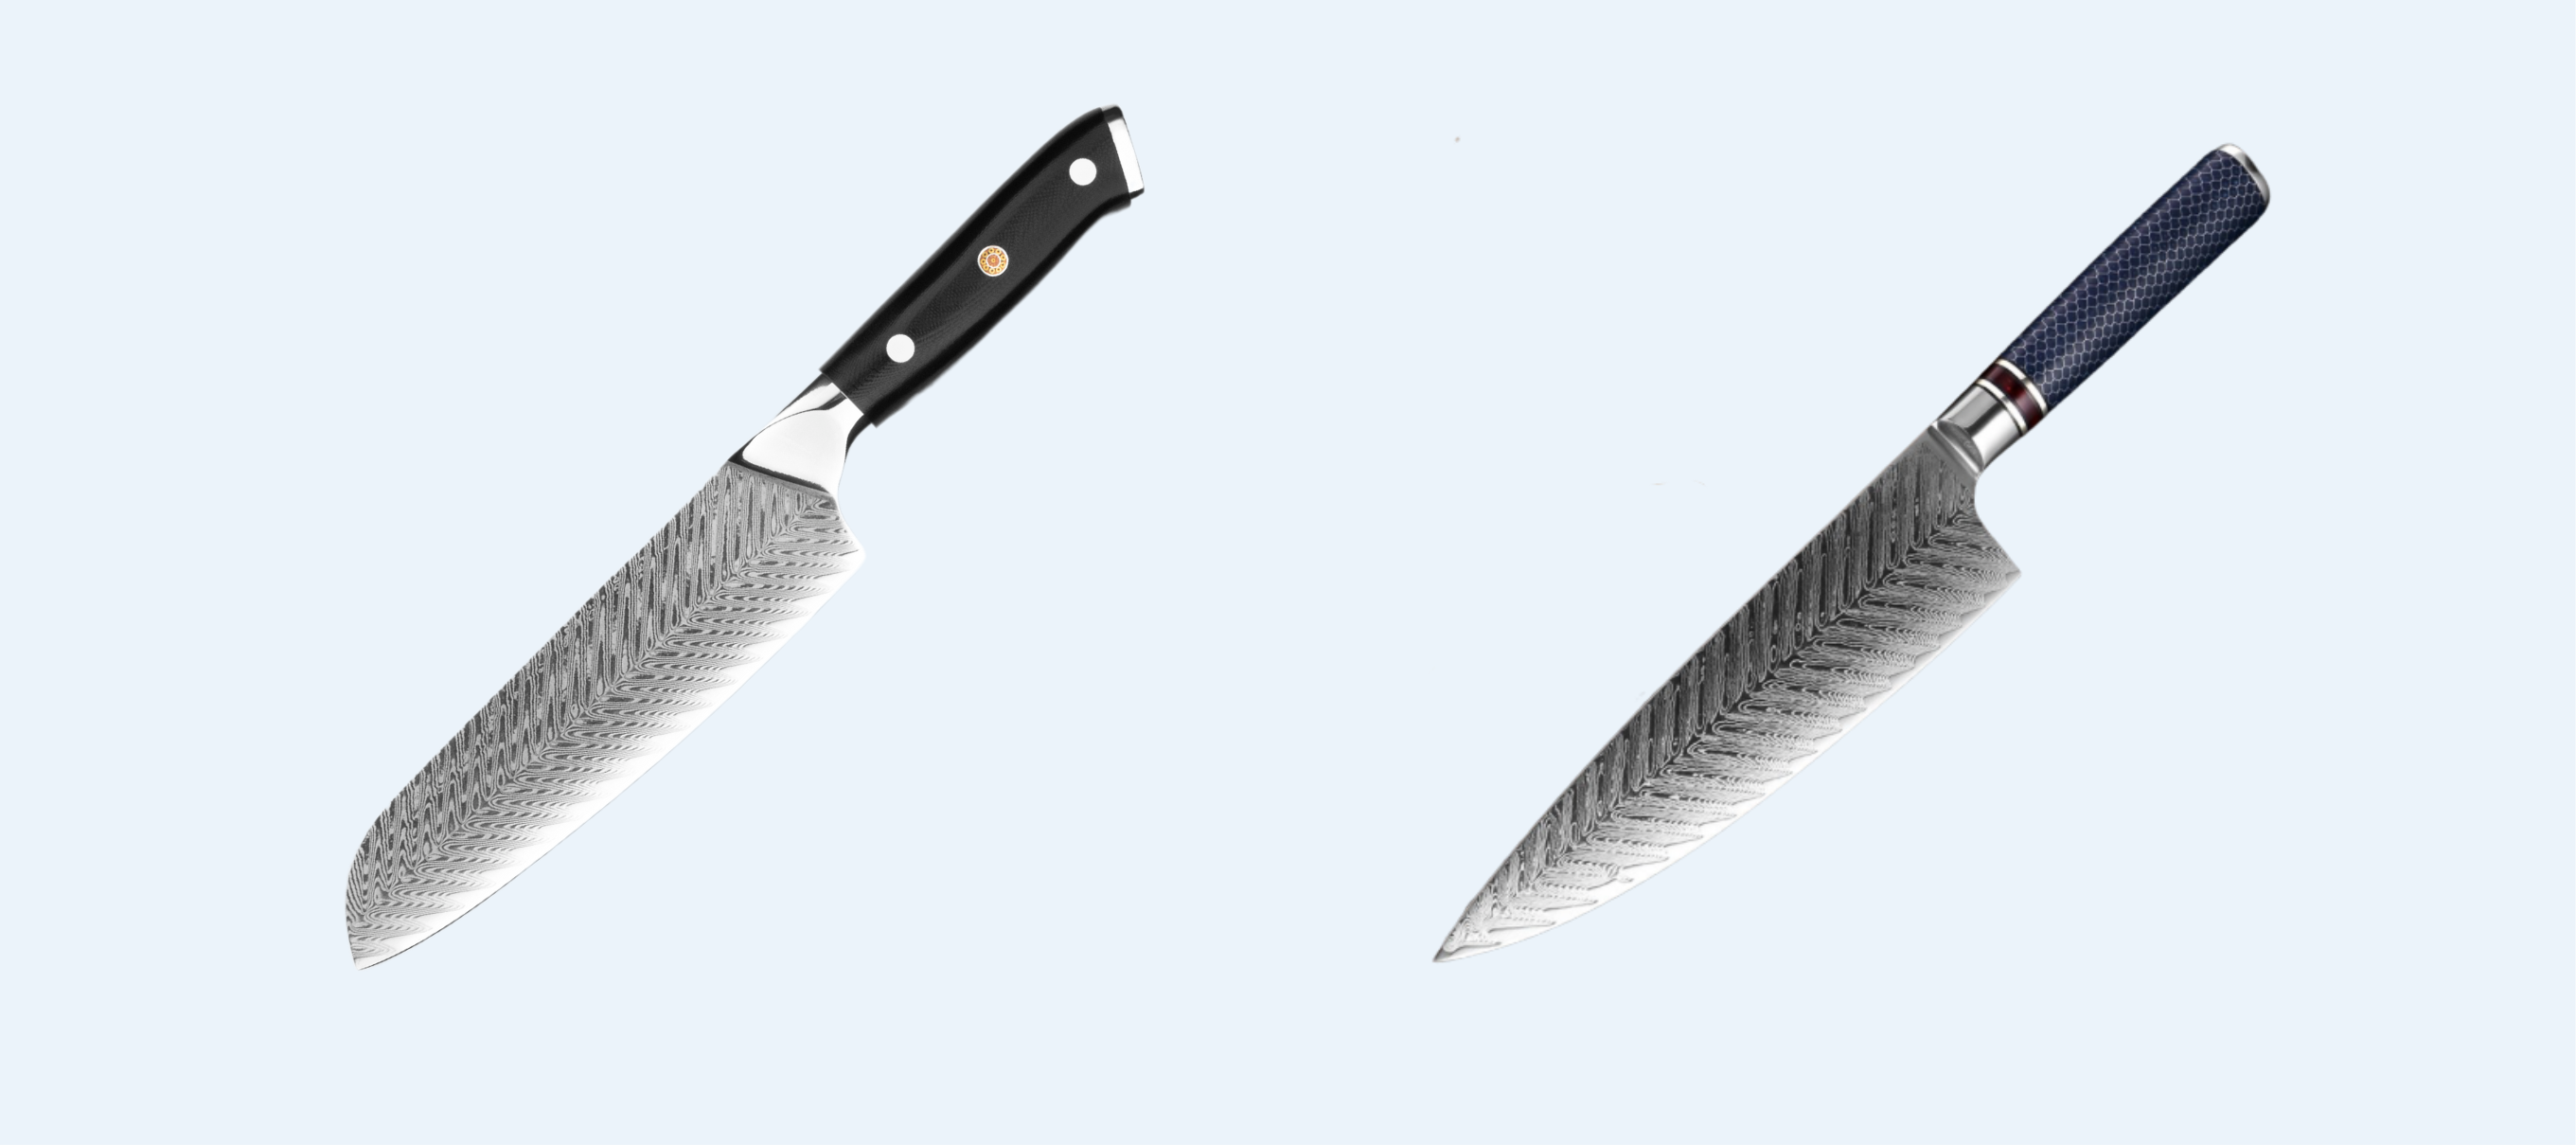 Santoku knives and chef's knives: what's the difference?